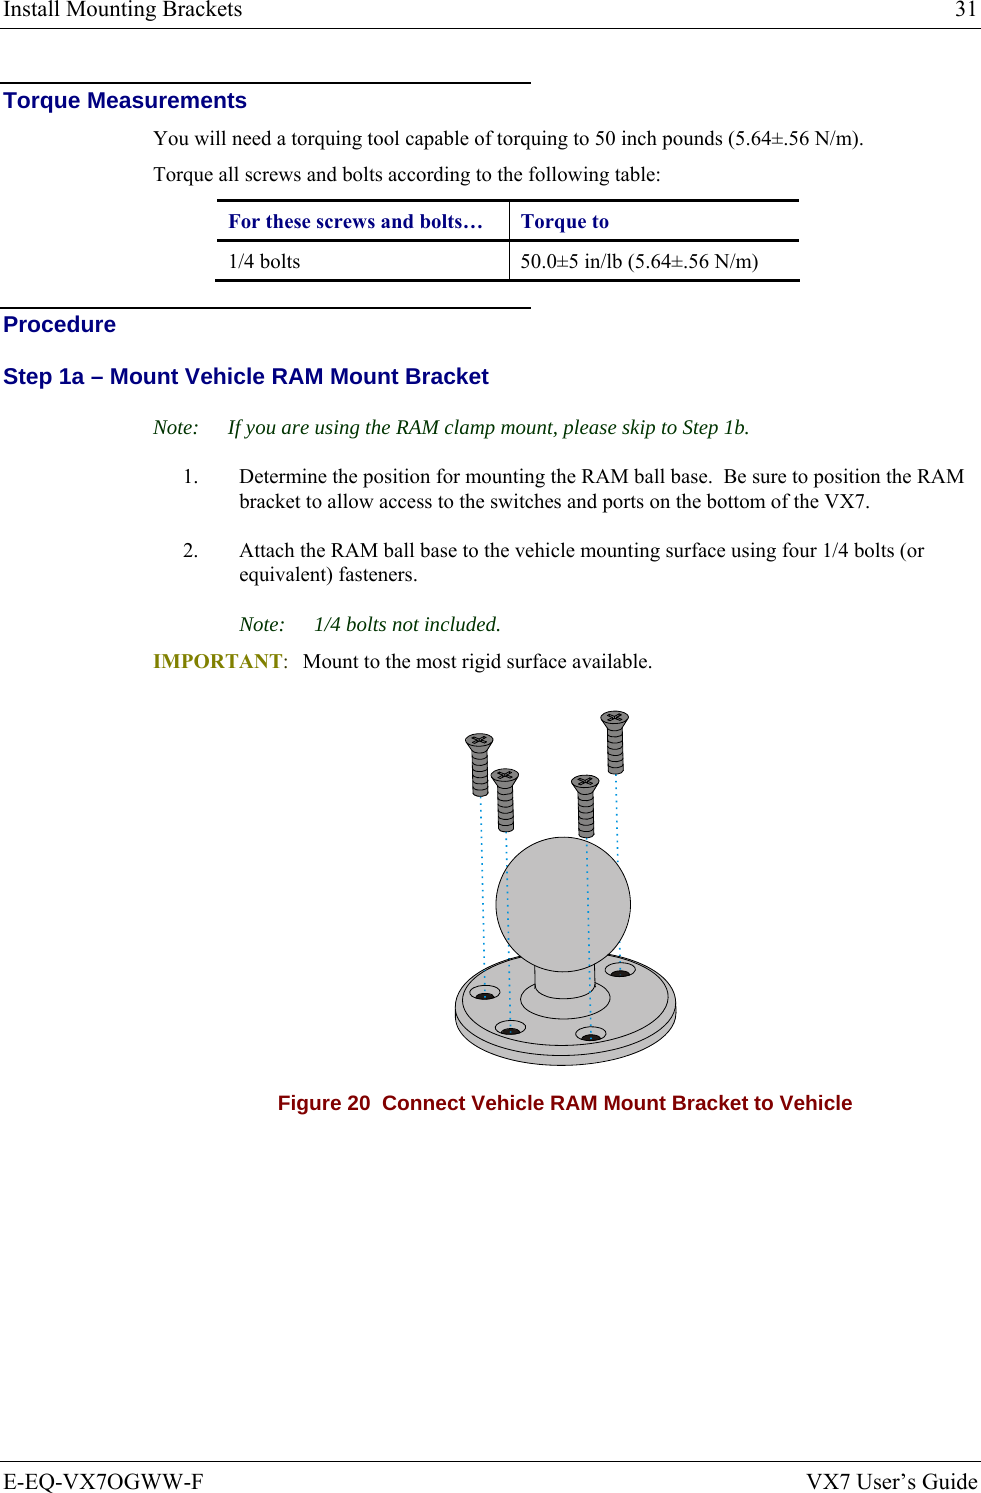 Install Mounting Brackets  31 E-EQ-VX7OGWW-F  VX7 User’s Guide Torque Measurements You will need a torquing tool capable of torquing to 50 inch pounds (5.64±.56 N/m). Torque all screws and bolts according to the following table: For these screws and bolts…  Torque to 1/4 bolts  50.0±5 in/lb (5.64±.56 N/m) Procedure Step 1a – Mount Vehicle RAM Mount Bracket Note:  If you are using the RAM clamp mount, please skip to Step 1b. 1.  Determine the position for mounting the RAM ball base.  Be sure to position the RAM bracket to allow access to the switches and ports on the bottom of the VX7. 2.  Attach the RAM ball base to the vehicle mounting surface using four 1/4 bolts (or equivalent) fasteners. Note:  1/4 bolts not included. IMPORTANT:  Mount to the most rigid surface available.  Figure 20  Connect Vehicle RAM Mount Bracket to Vehicle 